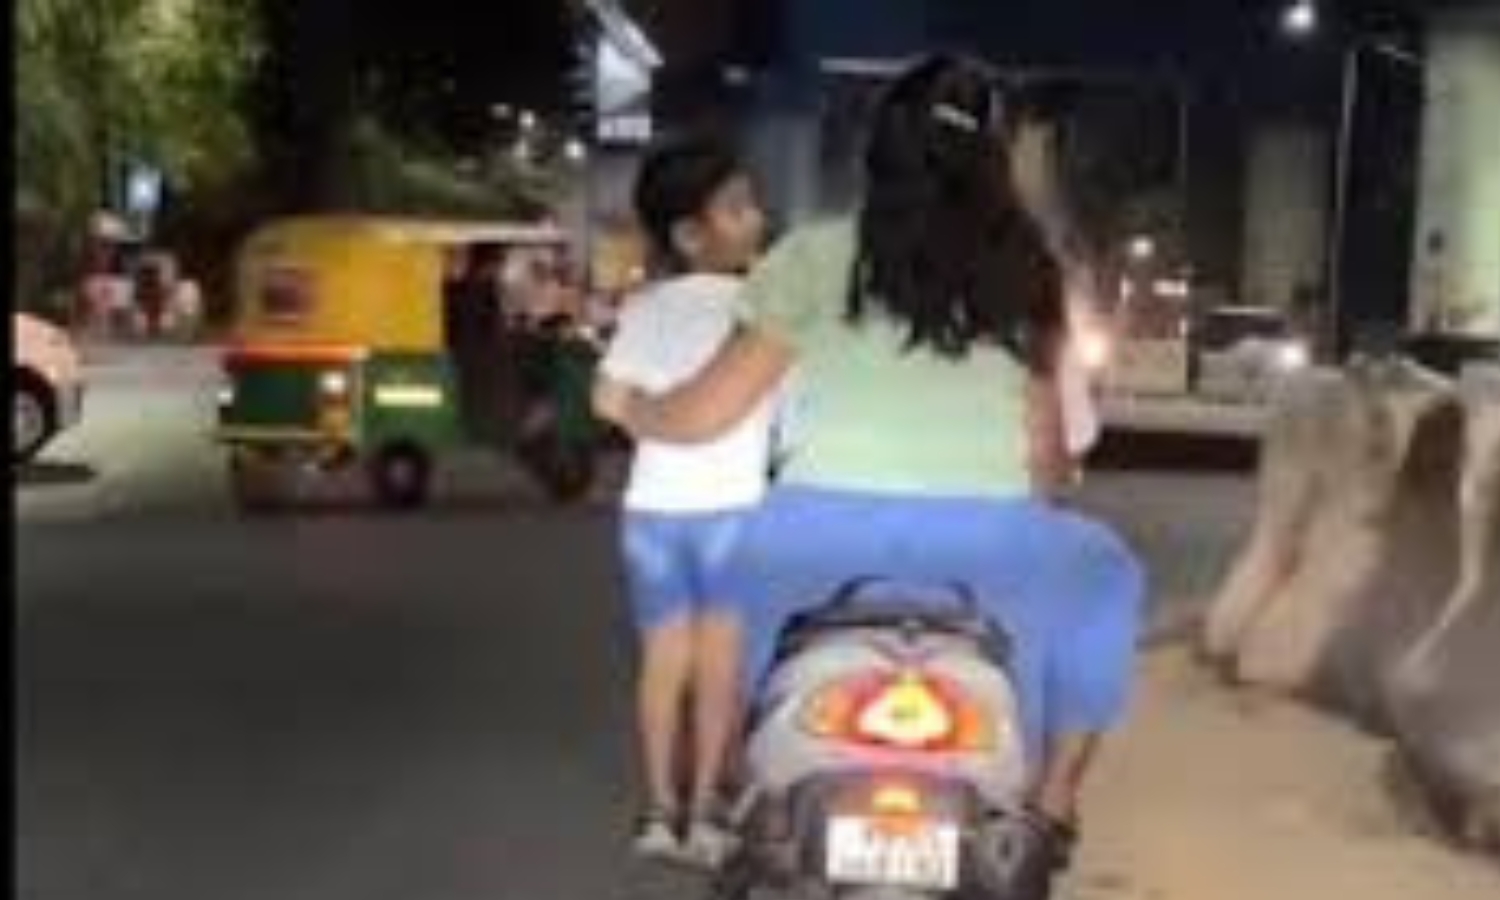 Outrage Erupts as Video Shows Child Standing on Moving Scooter in Bengaluru's Whitefield Area